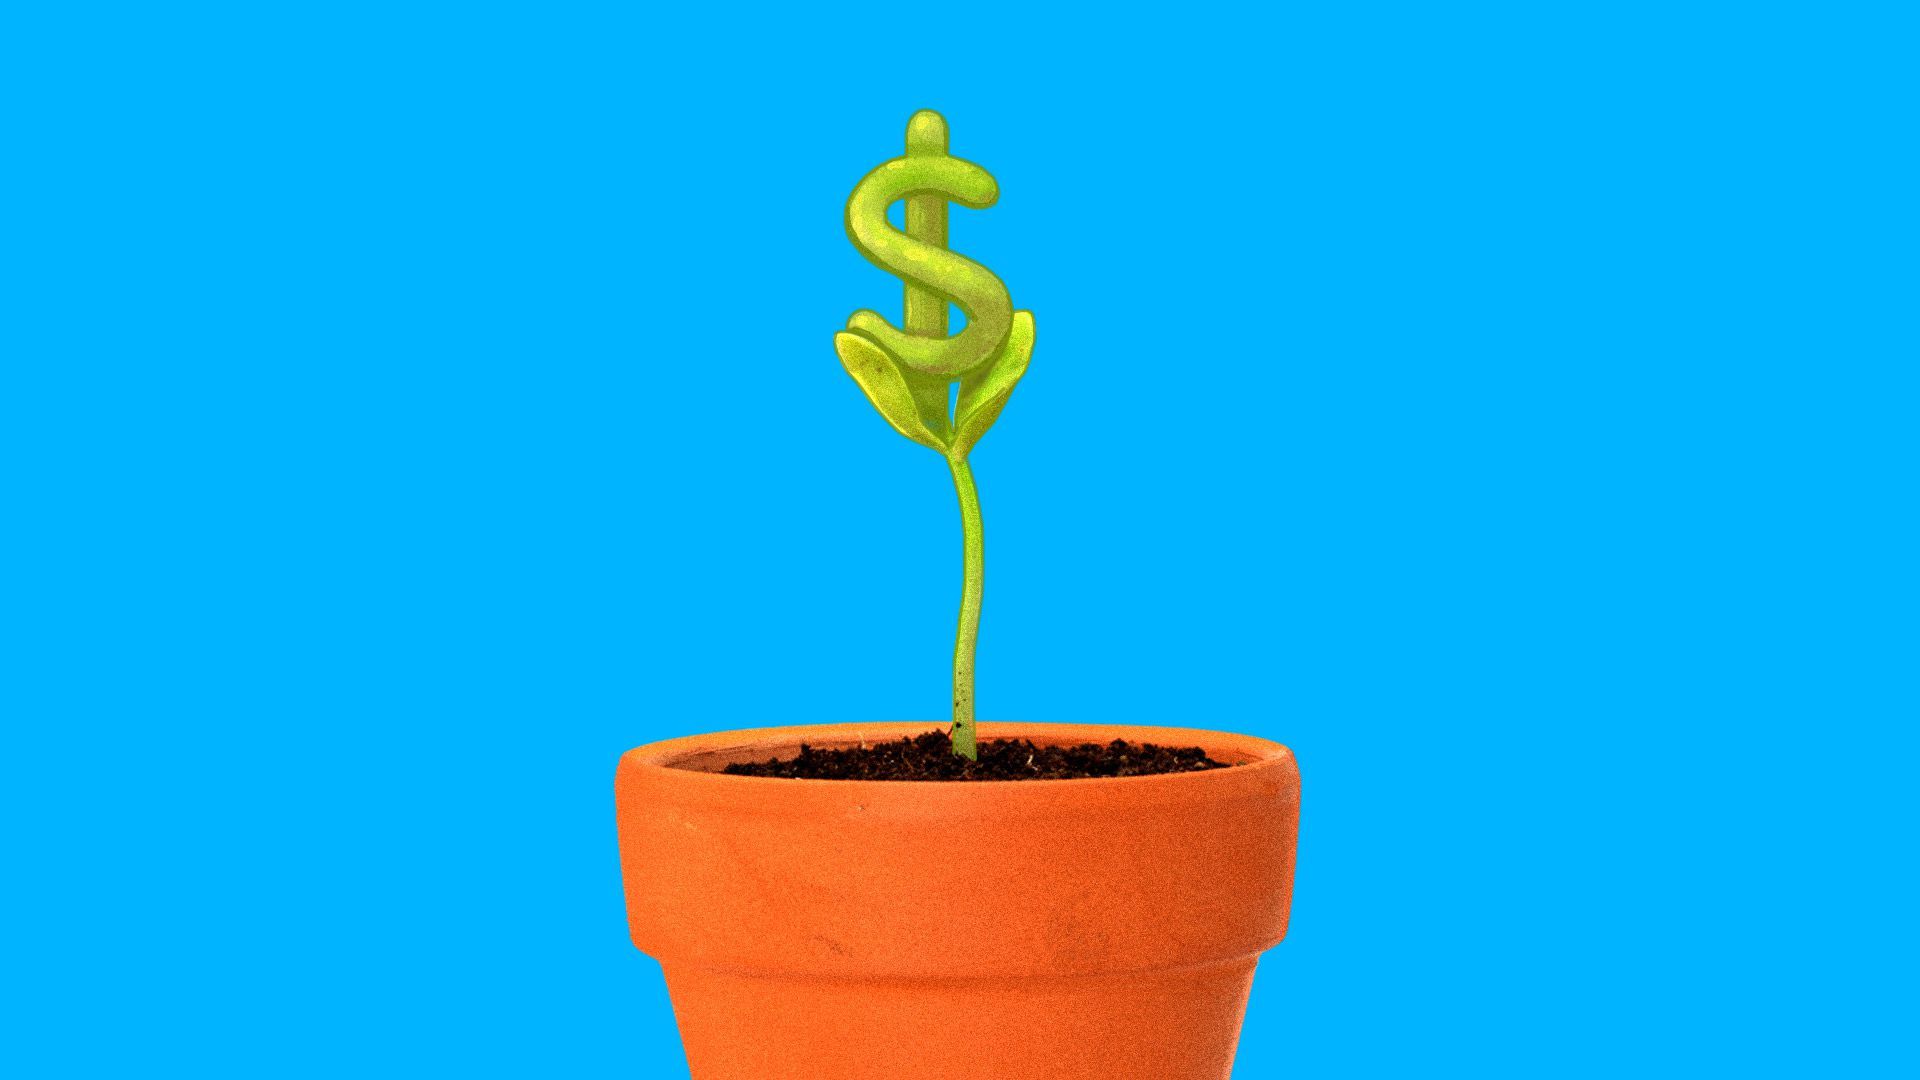 A green sprout shaped like a dollar sign rises from a terra cotta pot.